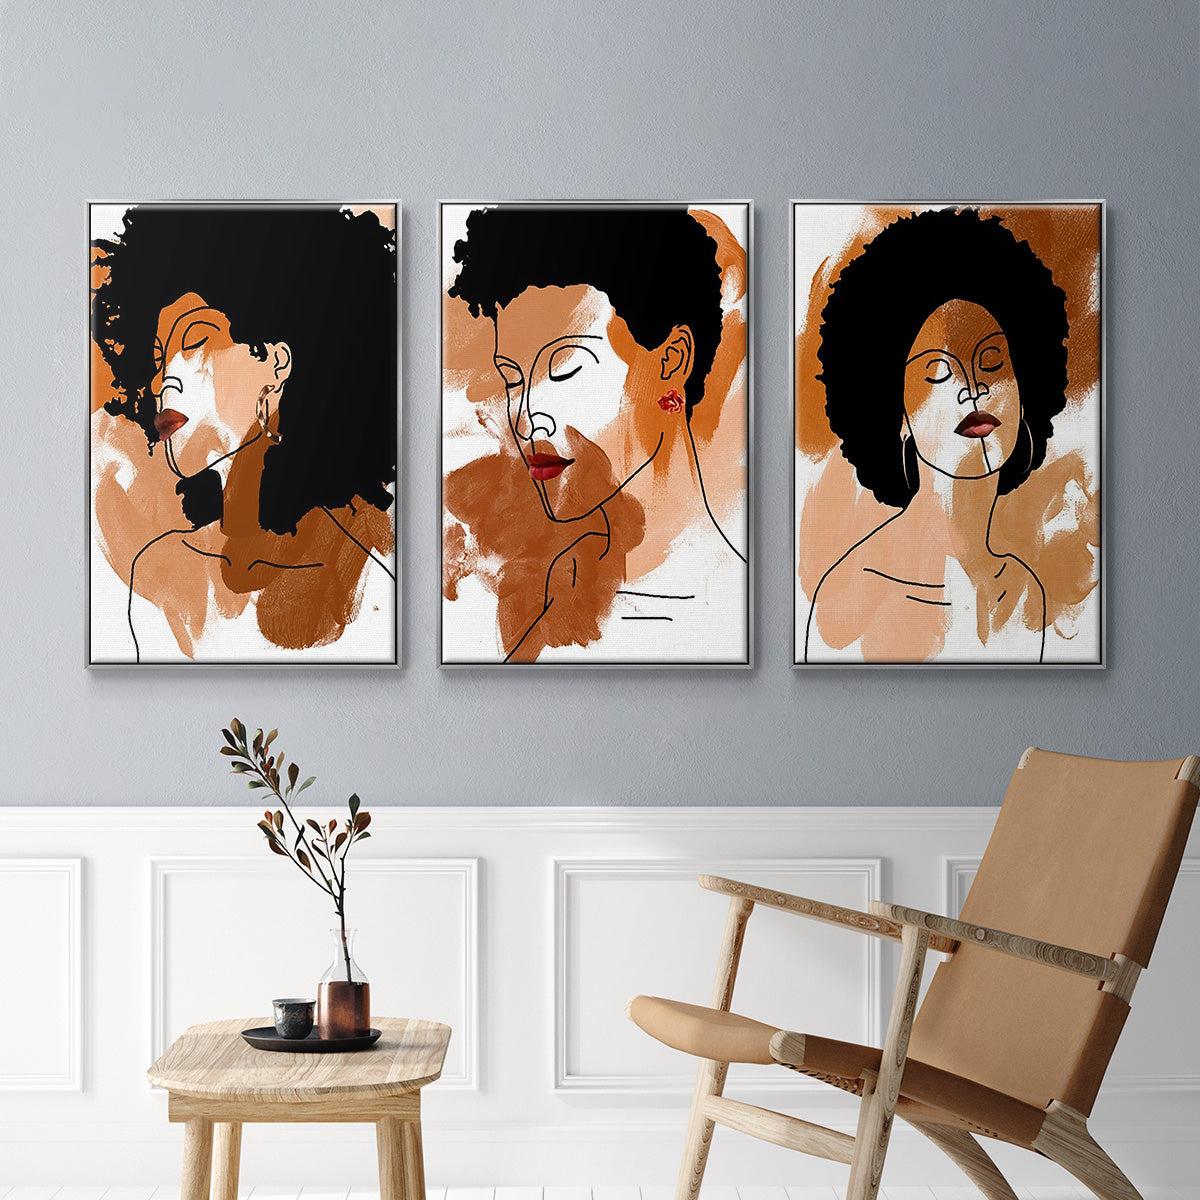 Phenomal Women I - Framed Premium Gallery Wrapped Canvas L Frame 3 Piece Set - Ready to Hang